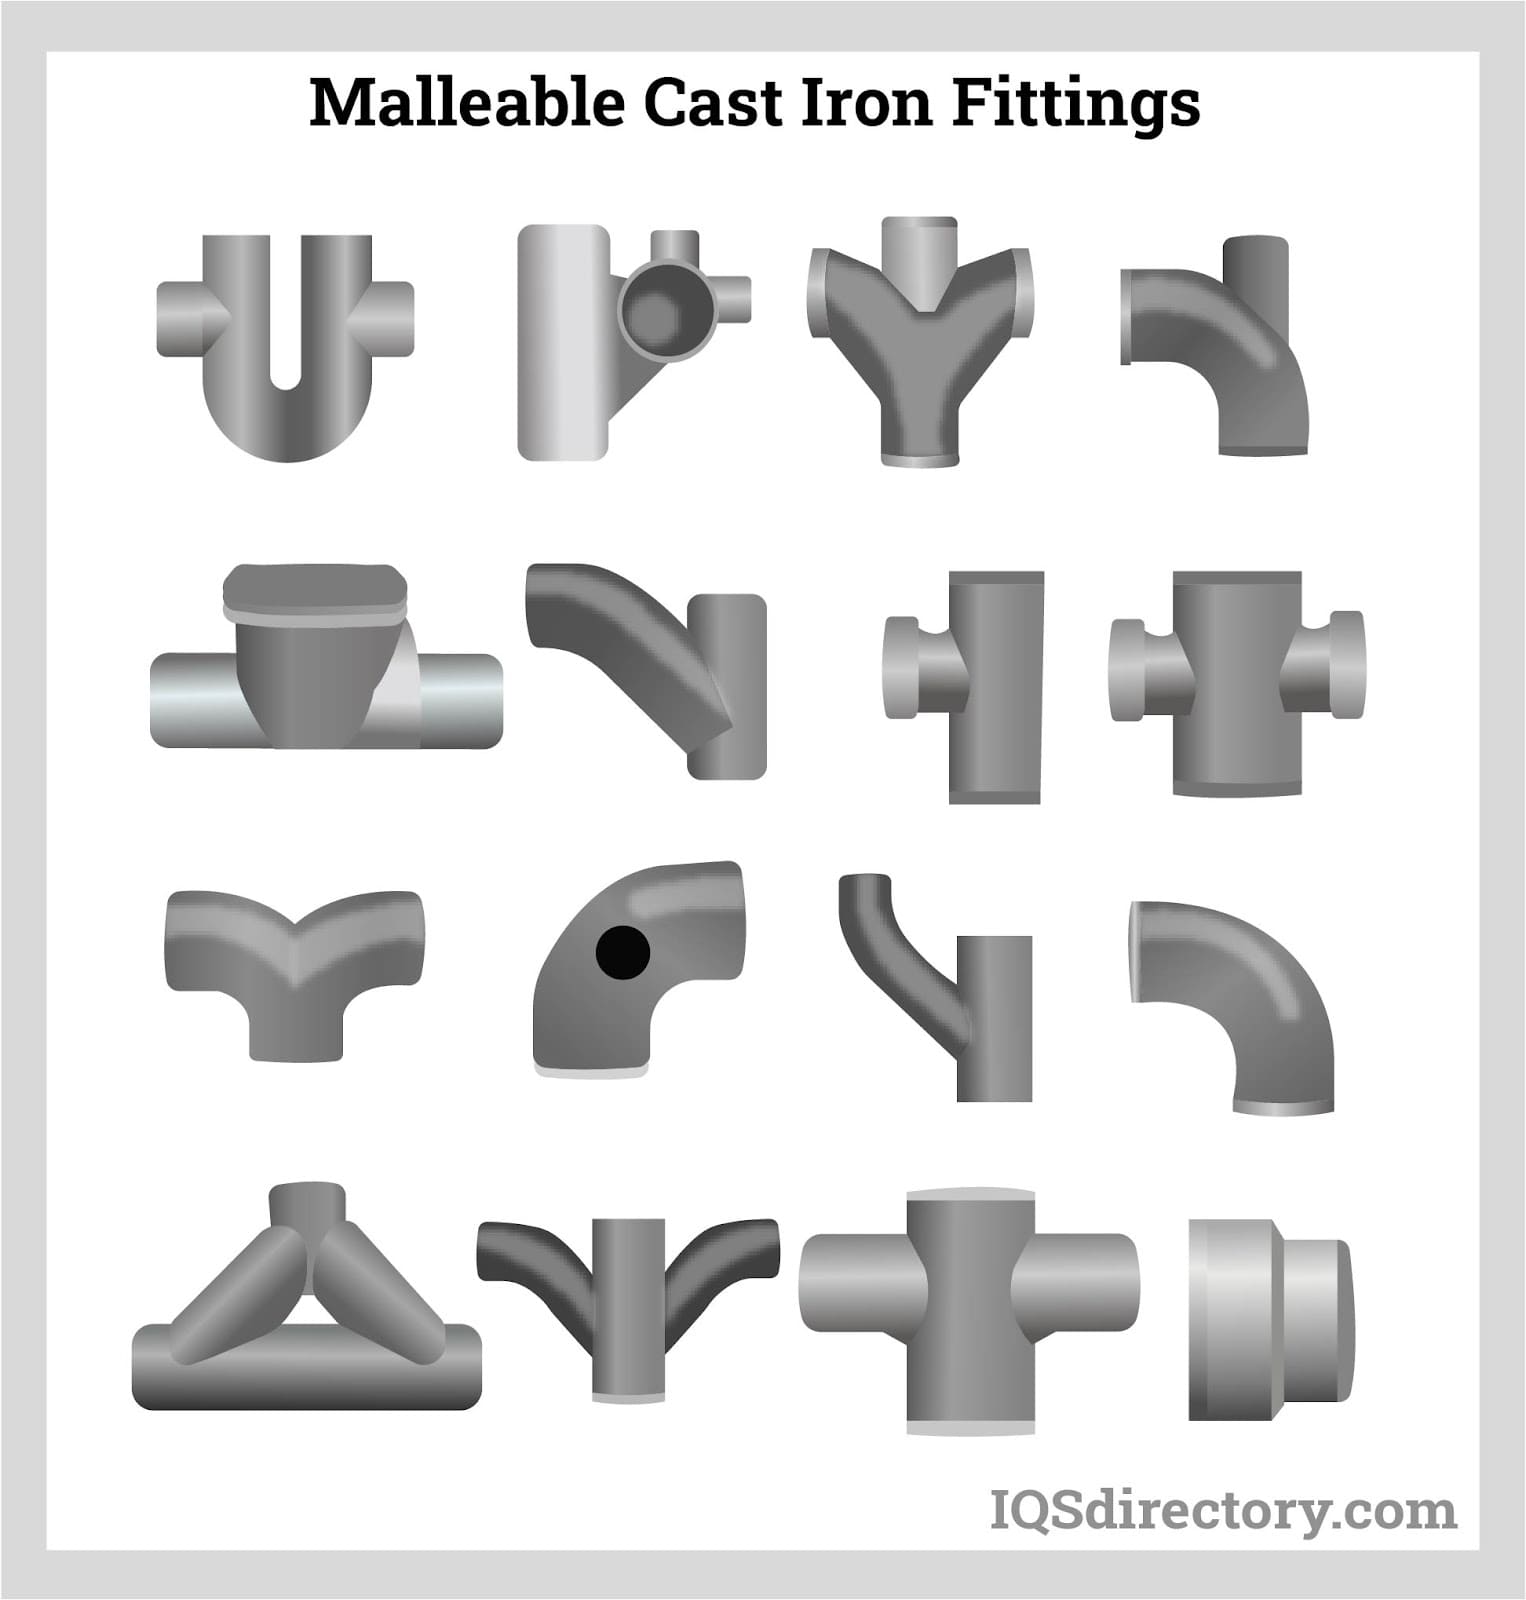 Cast Iron Types  Metal Casting Resources